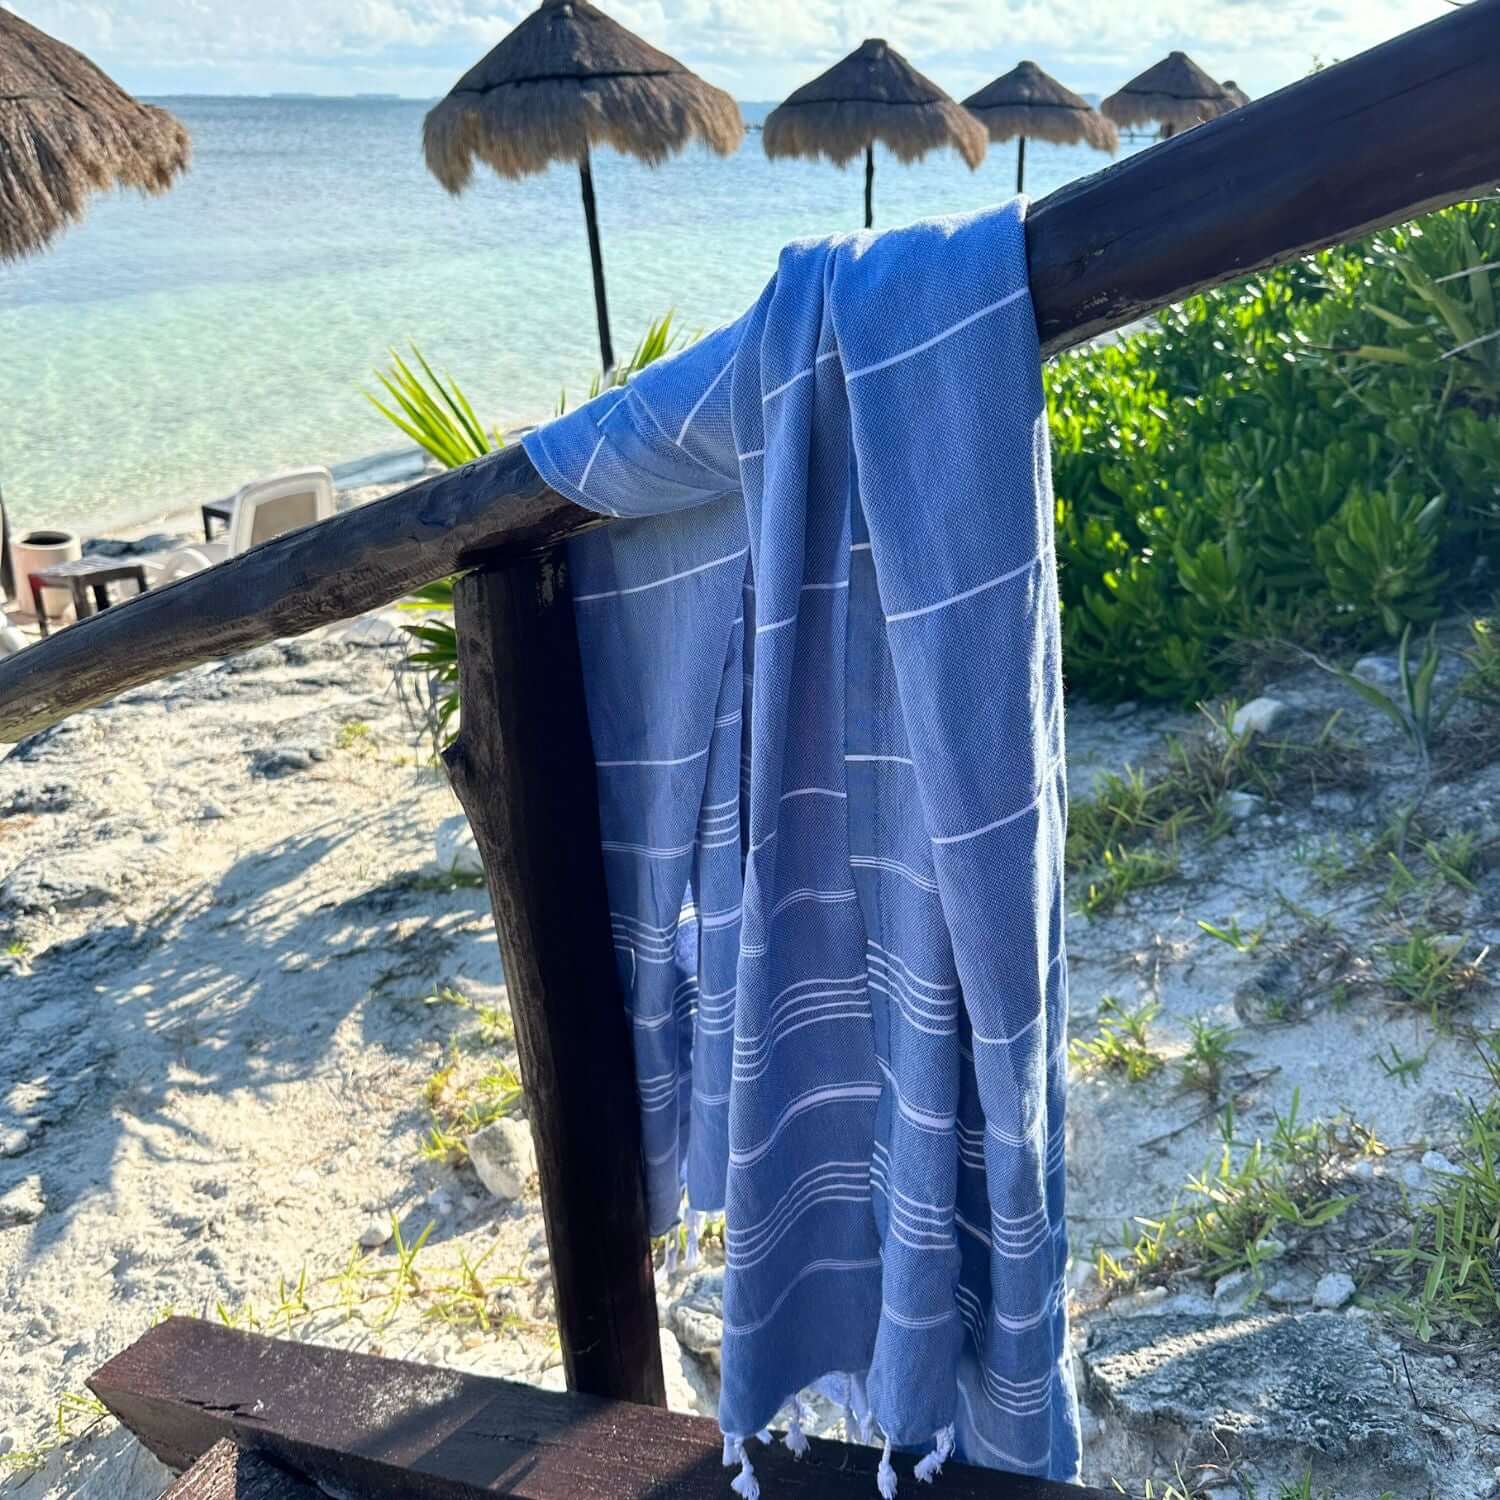 Loom Legacy dark blue and white patterned beach towel over a wooden rail, with a beach background showing straw umbrellas, clear water, and sandy shore.